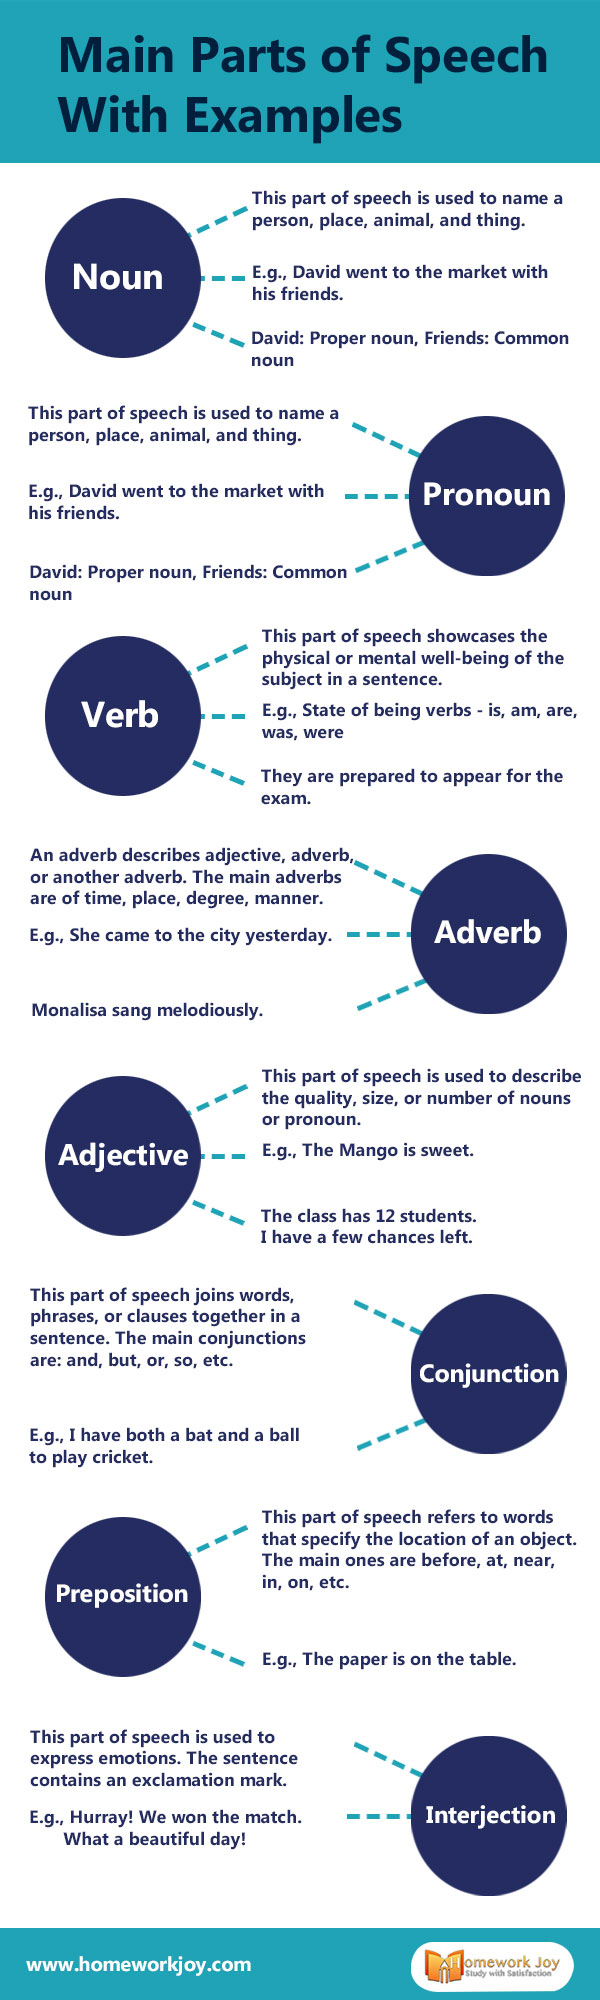 Main Parts of Speech With Examples